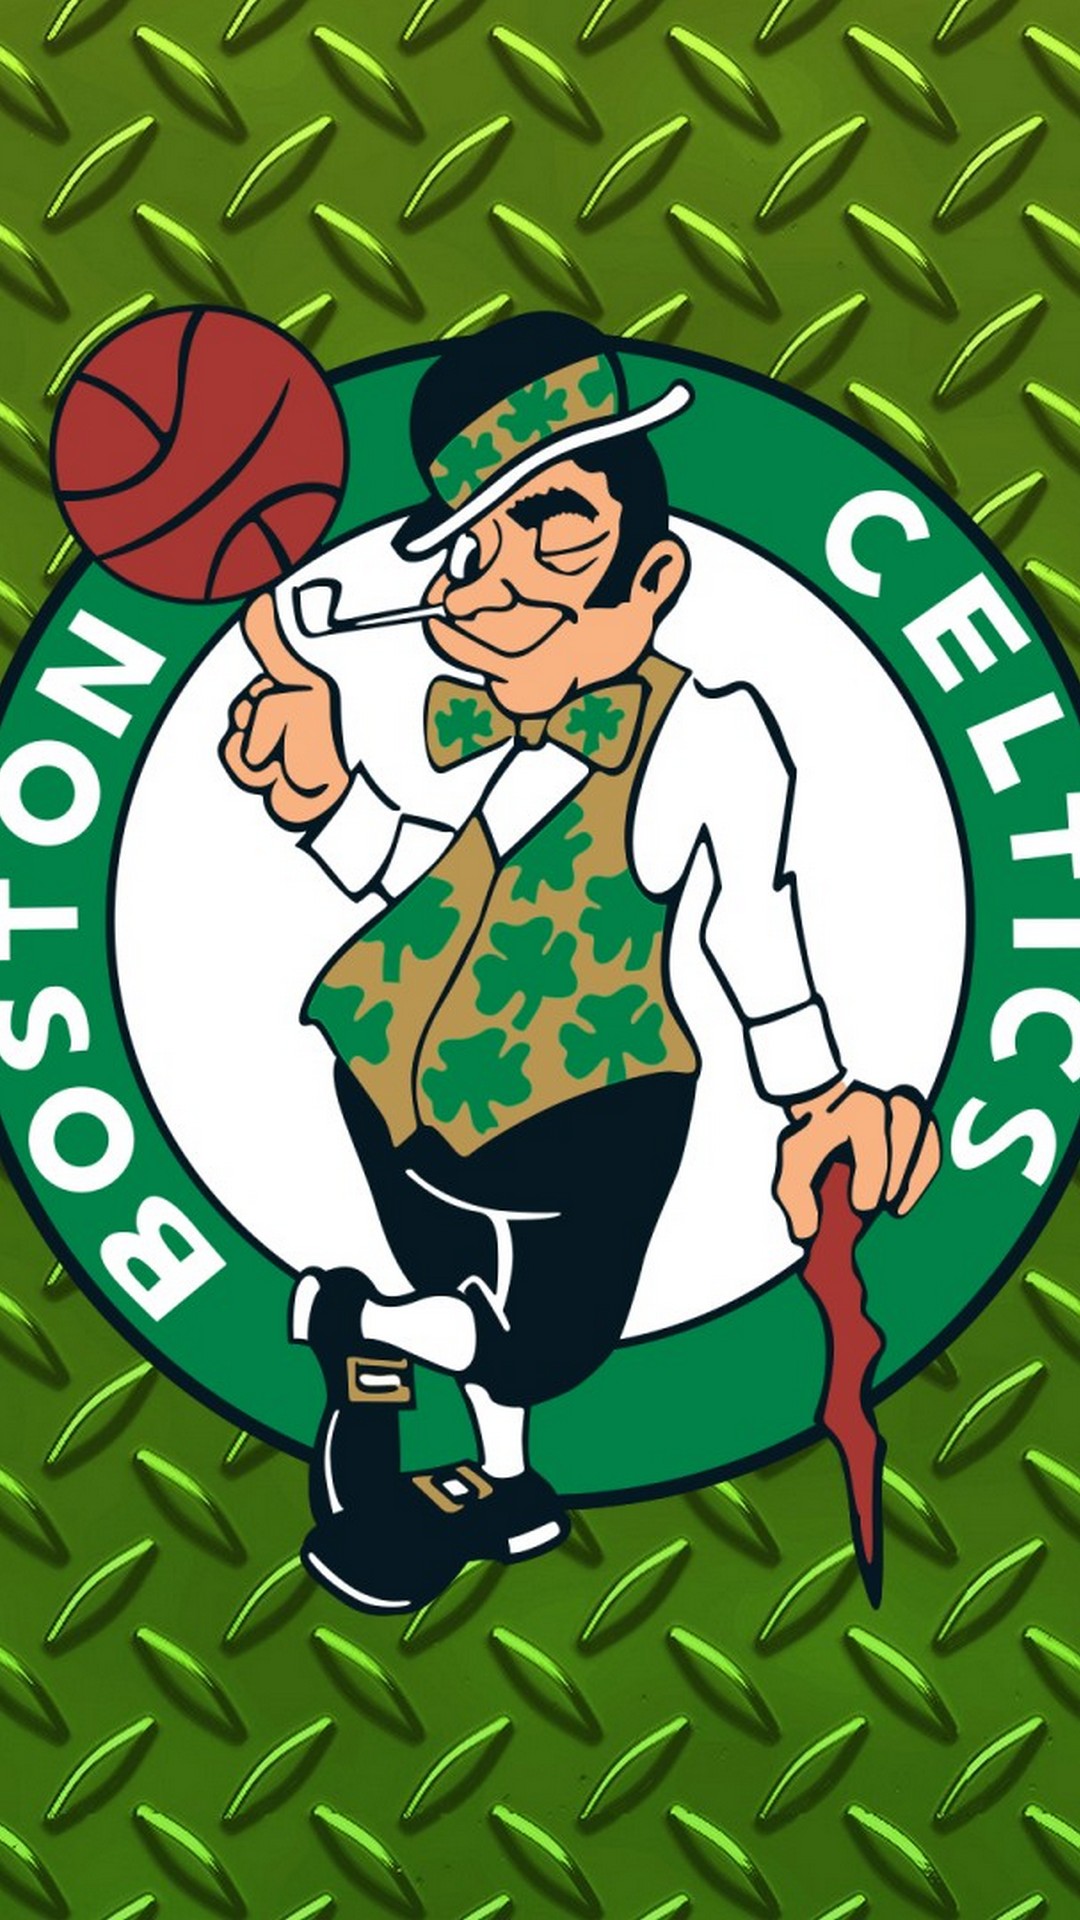 Boston Celtics Cellphone Wallpaper With Resolution 1080X1920 pixel. You can make this wallpaper for your Desktop Computer Backgrounds, Mac Wallpapers, Android Lock screen or iPhone Screensavers